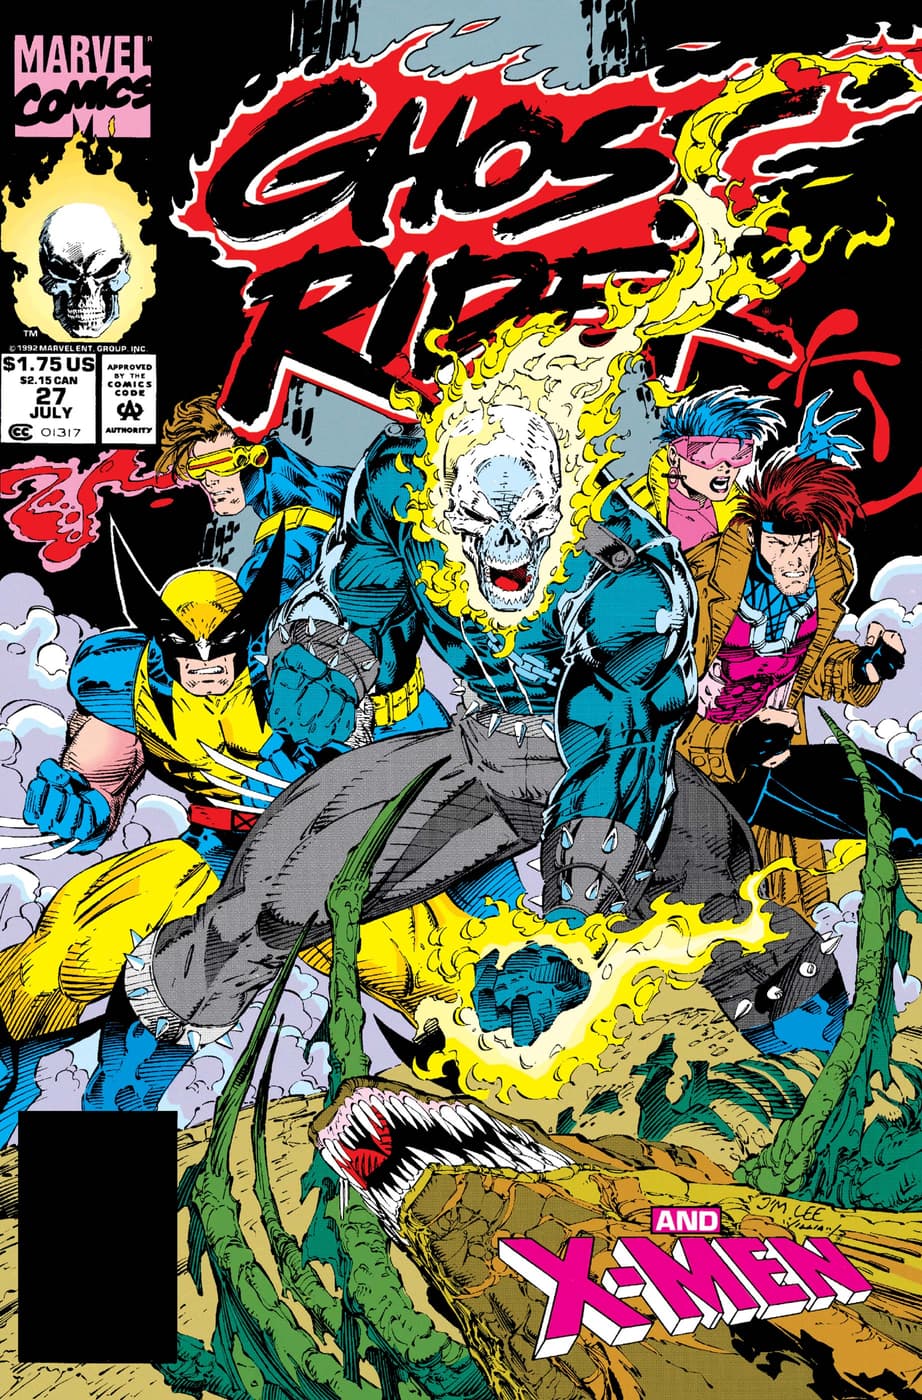 GHOST RIDER (1990) #27 cover by Jim Lee